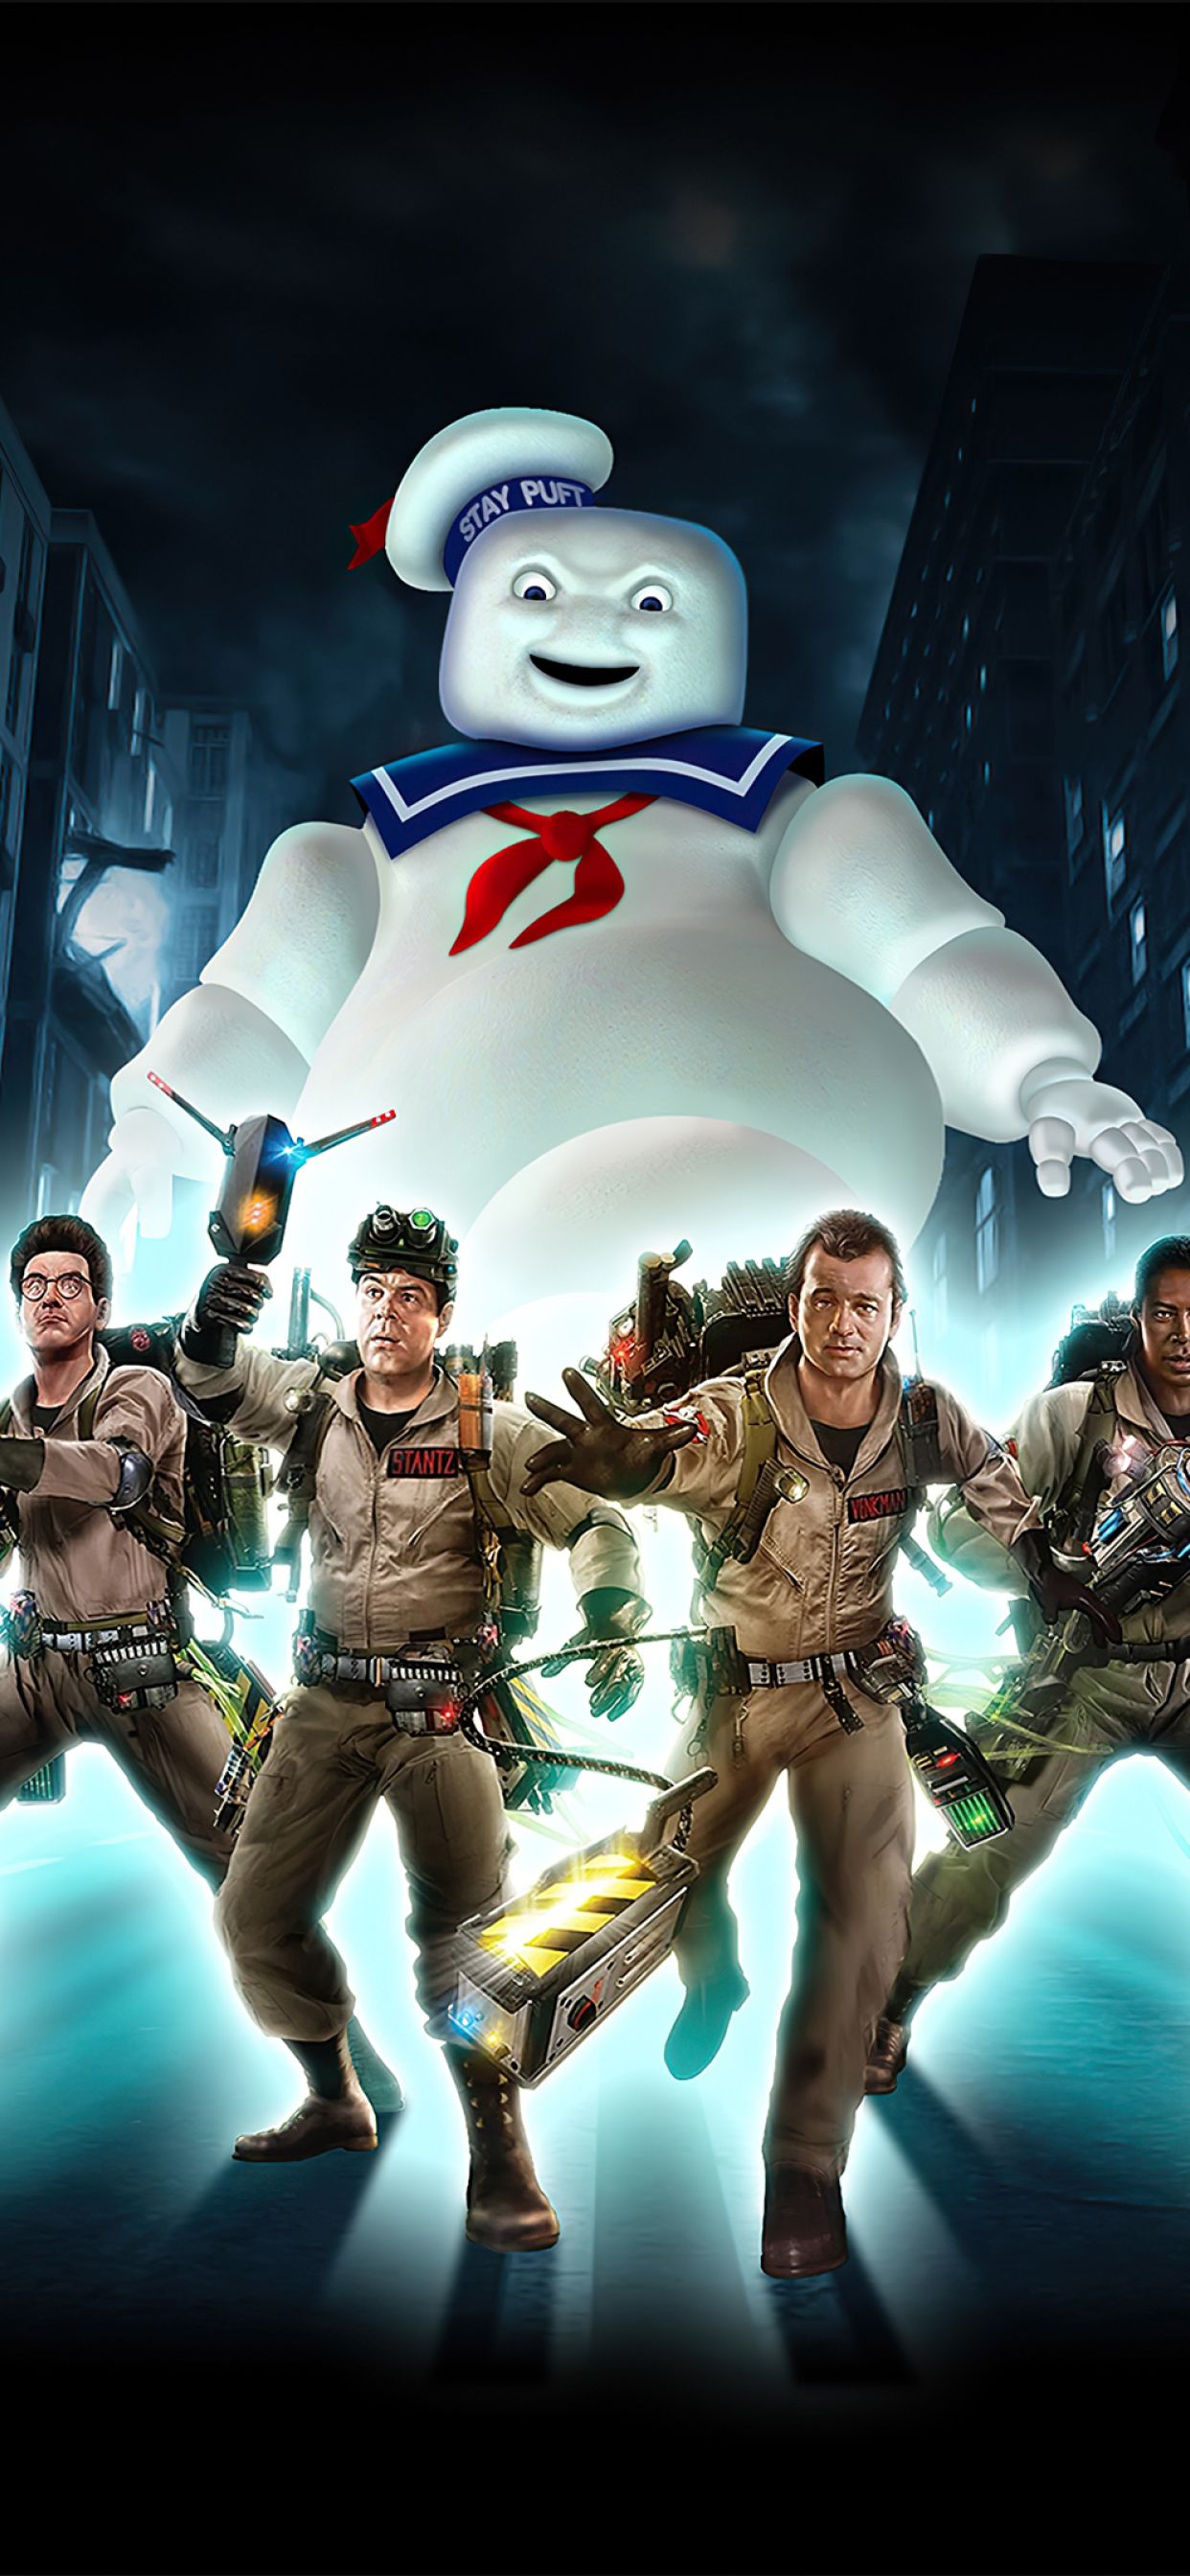 Ghostbusters The Video Game Remastered iPhone XS MAX Wallpaper, HD Games 4K Wallpaper, Image, Photo and Background